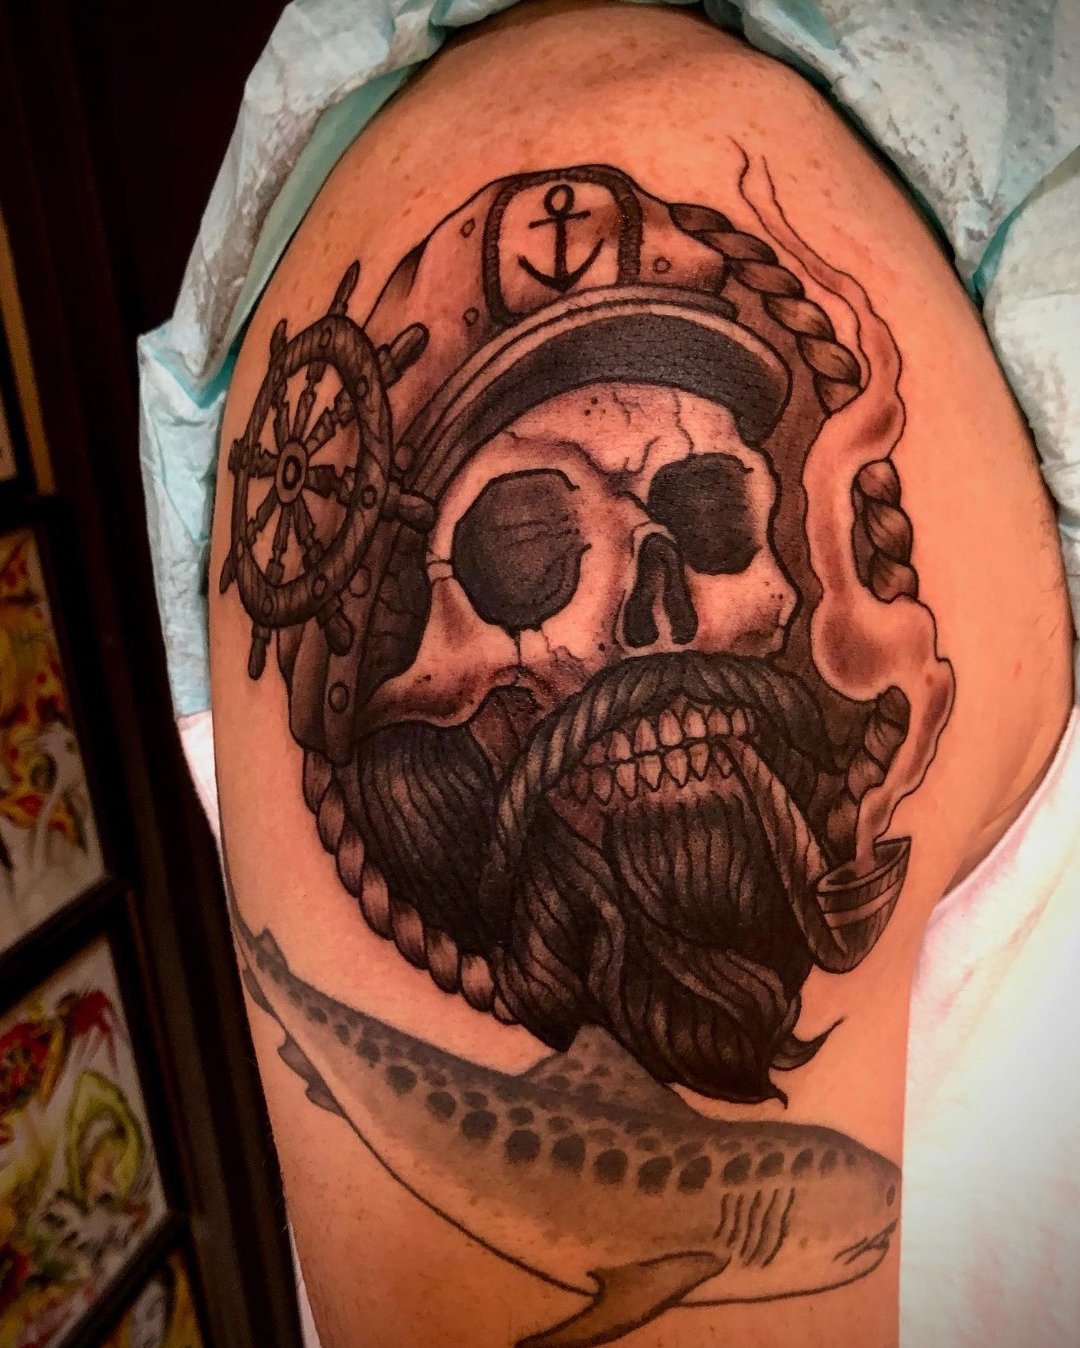 Traditional Sailor Tattoos: A Timeless Art Form